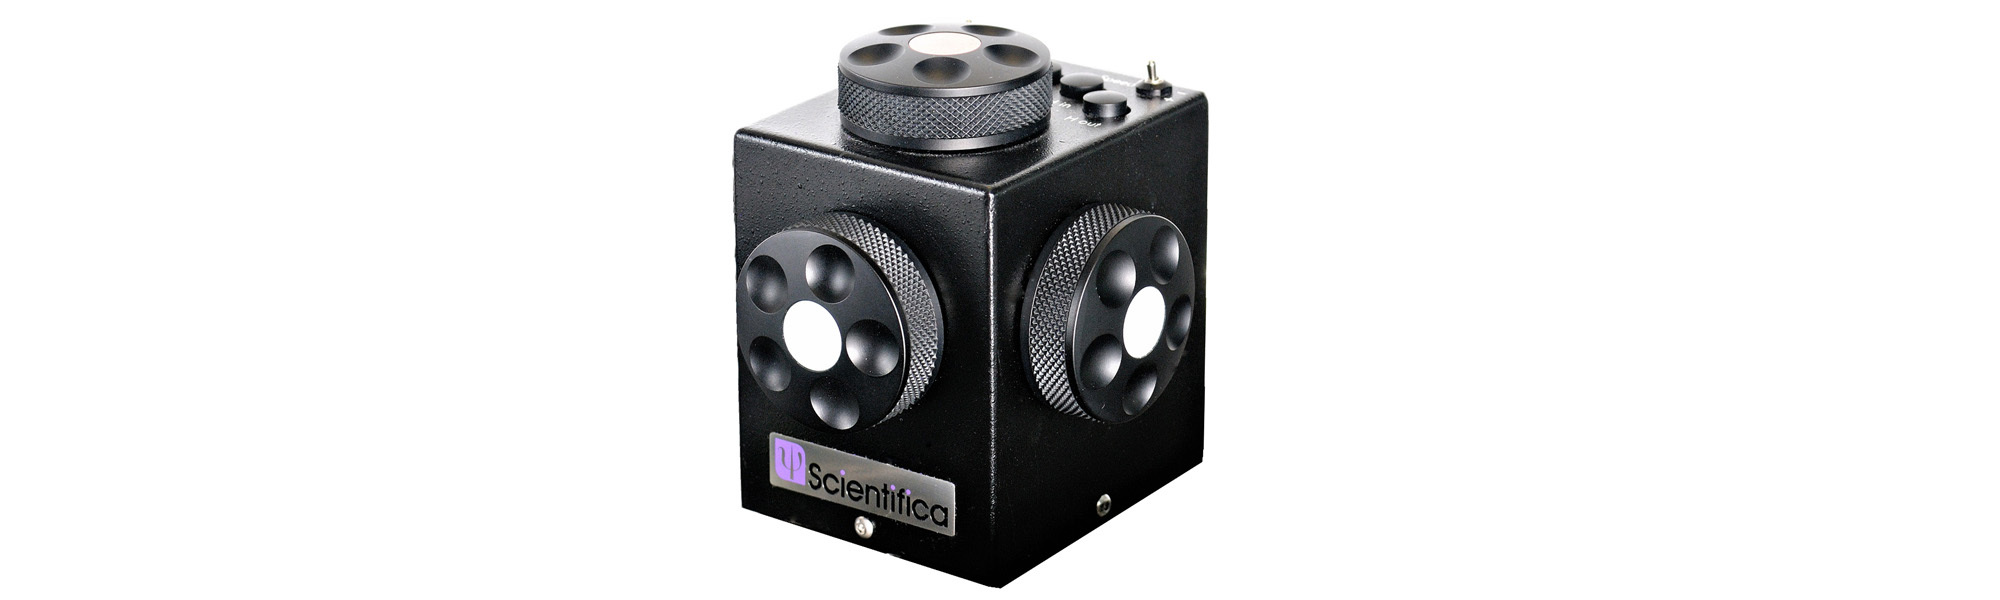 Scientifica control options including control cube and control pad